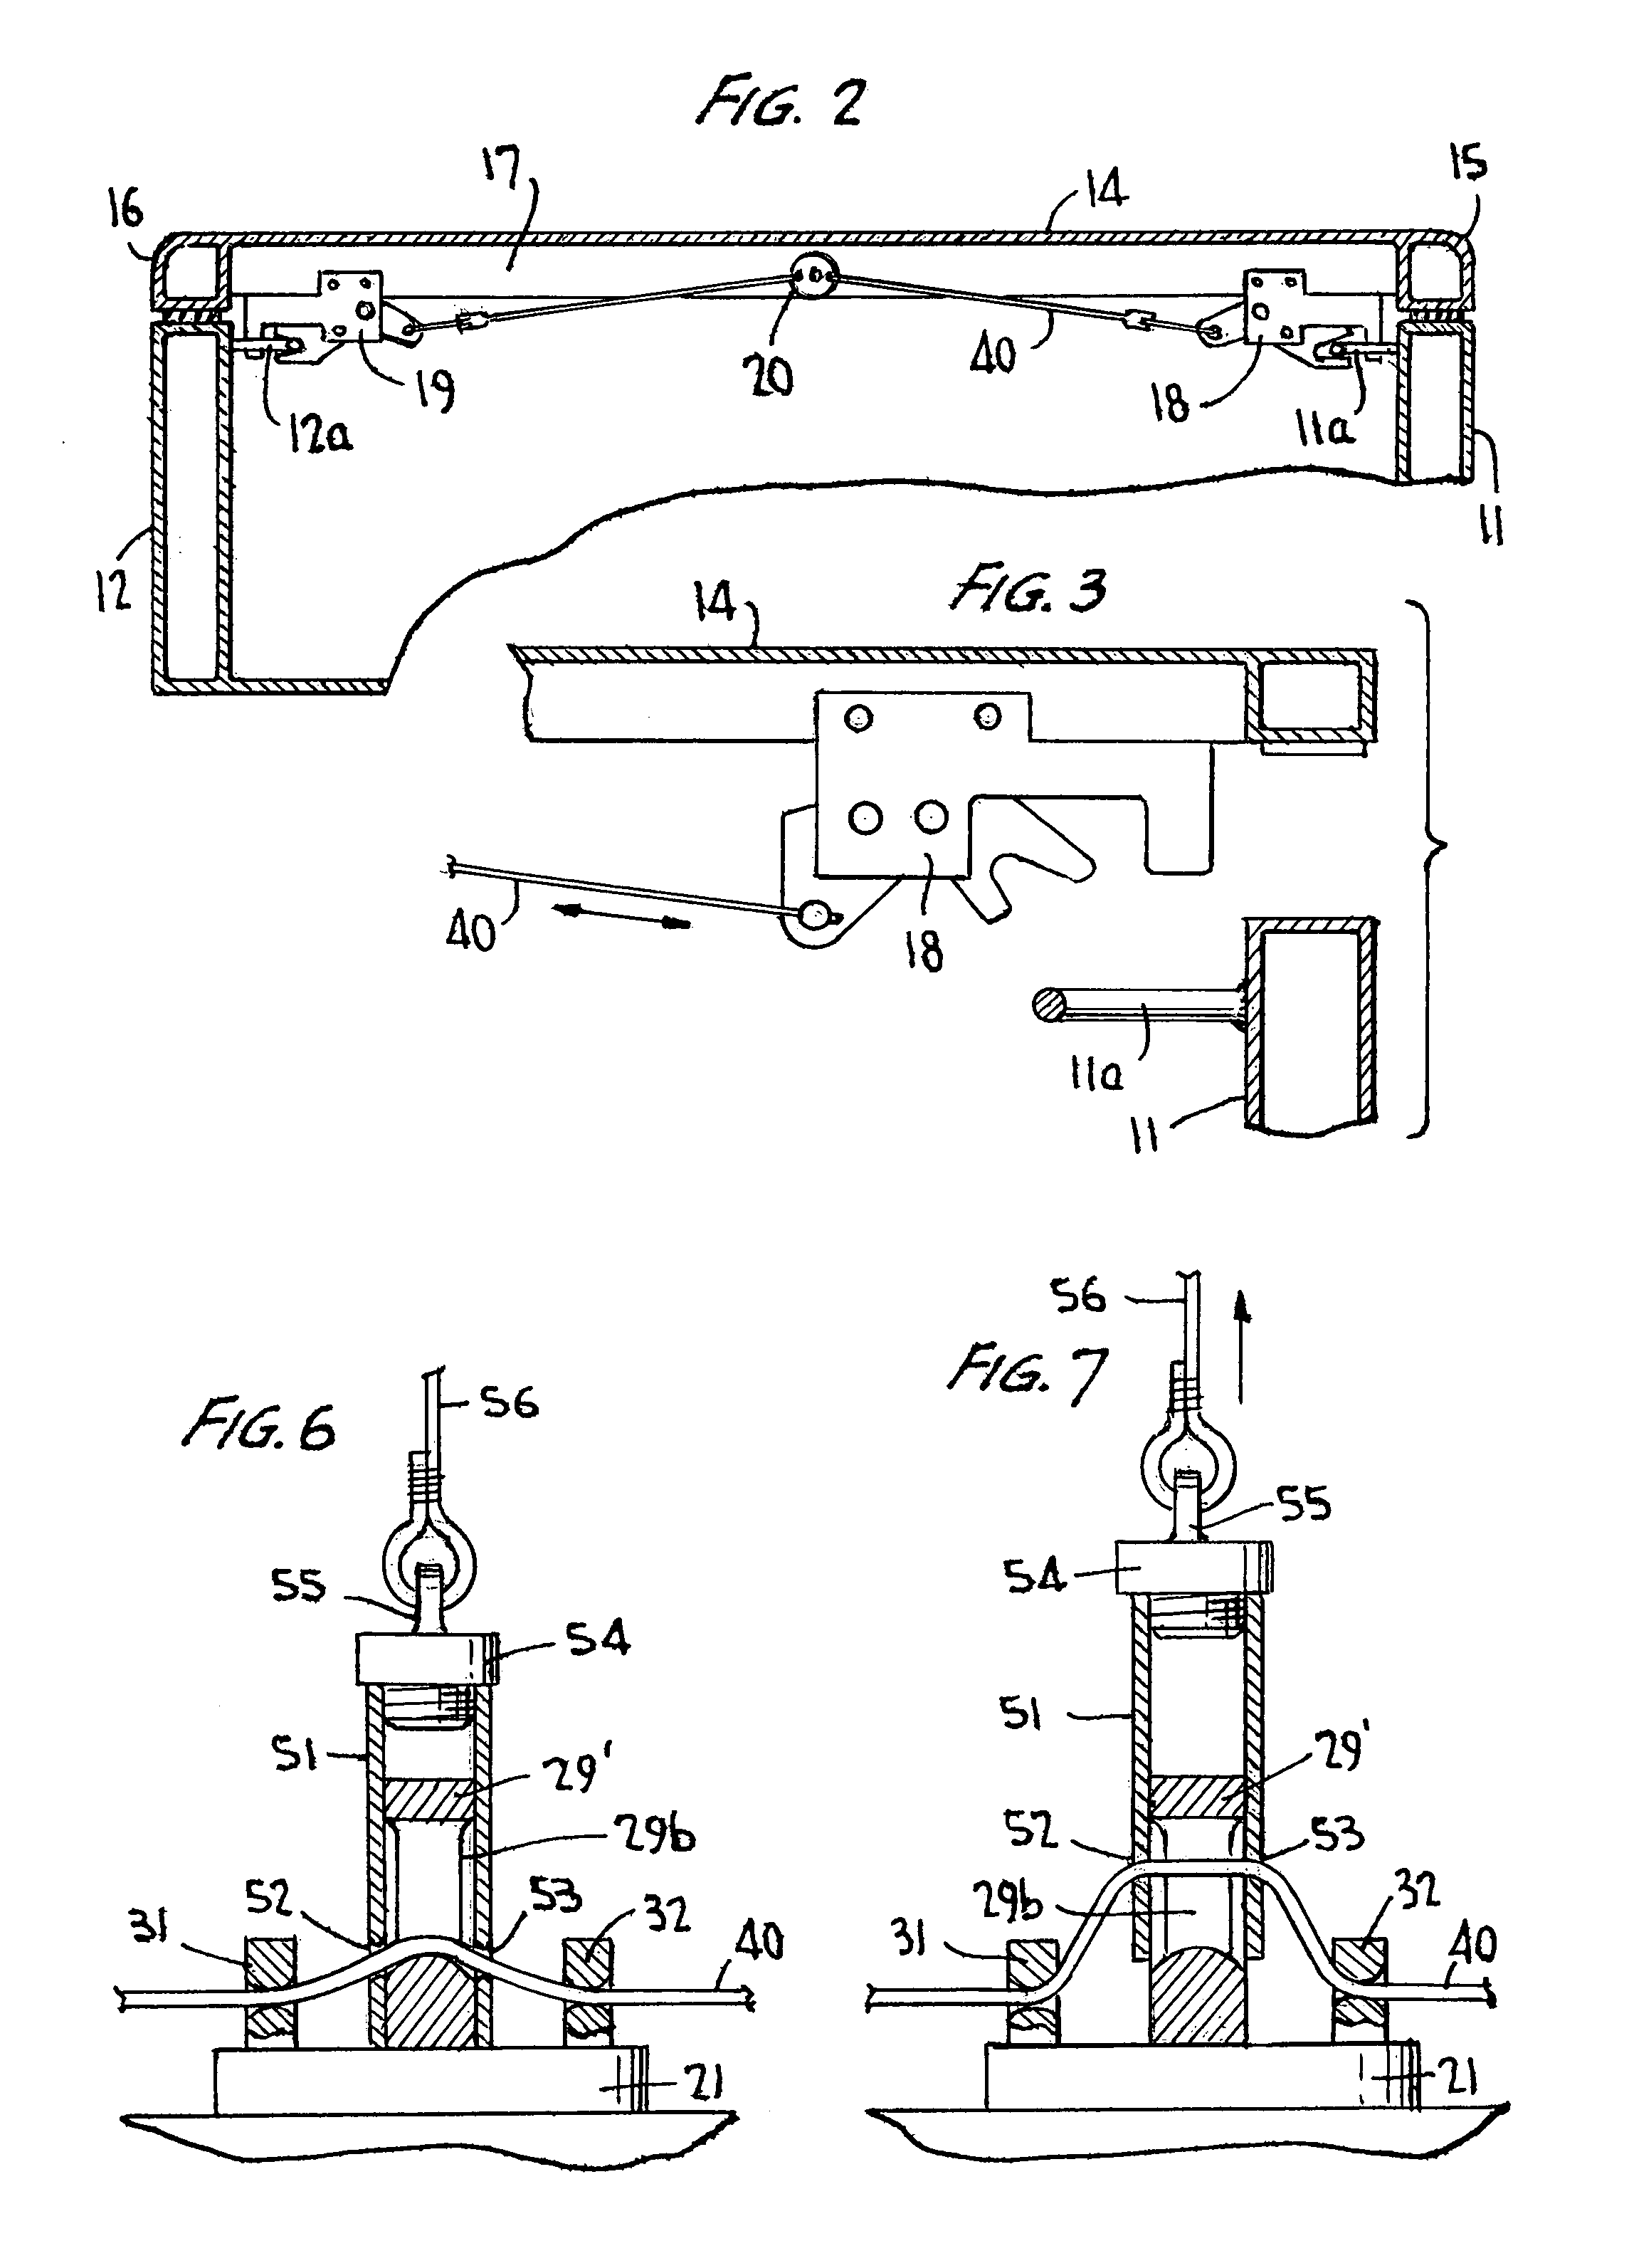 Push button latch release assembly